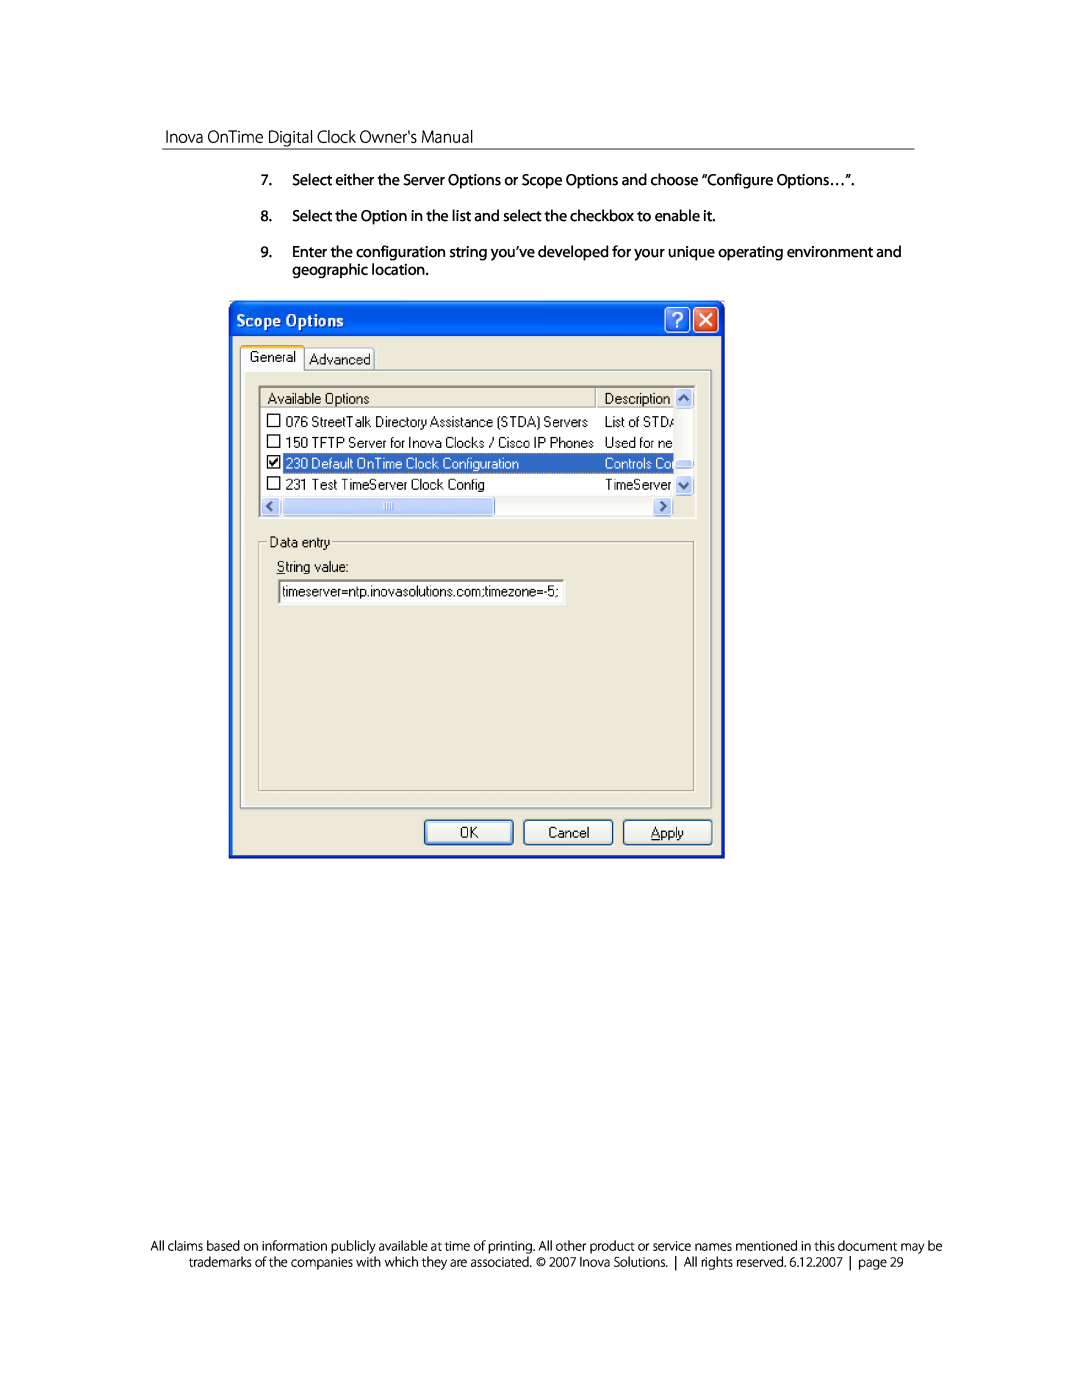 Inova OnTimeTM owner manual Select the Option in the list and select the checkbox to enable it 